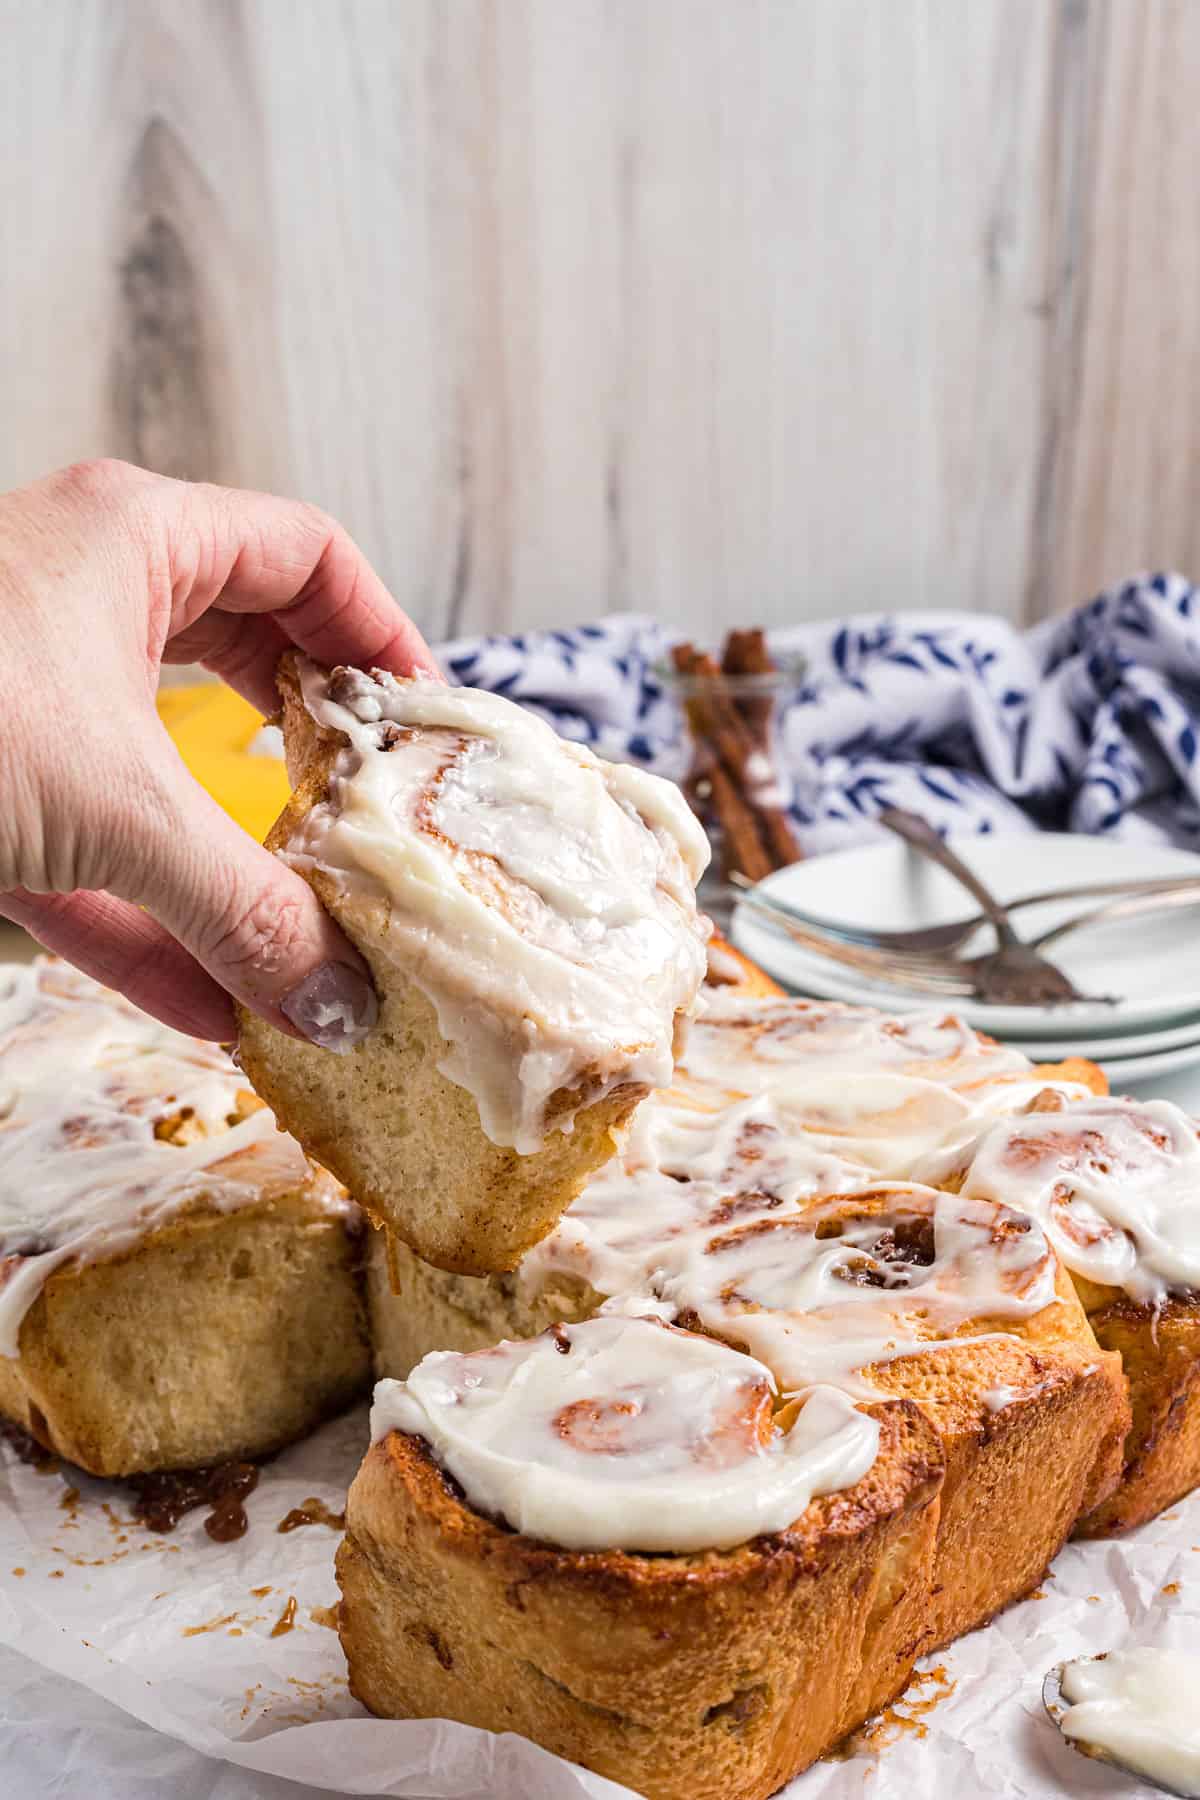 A single cinnamon roll is being lifted from the batch.